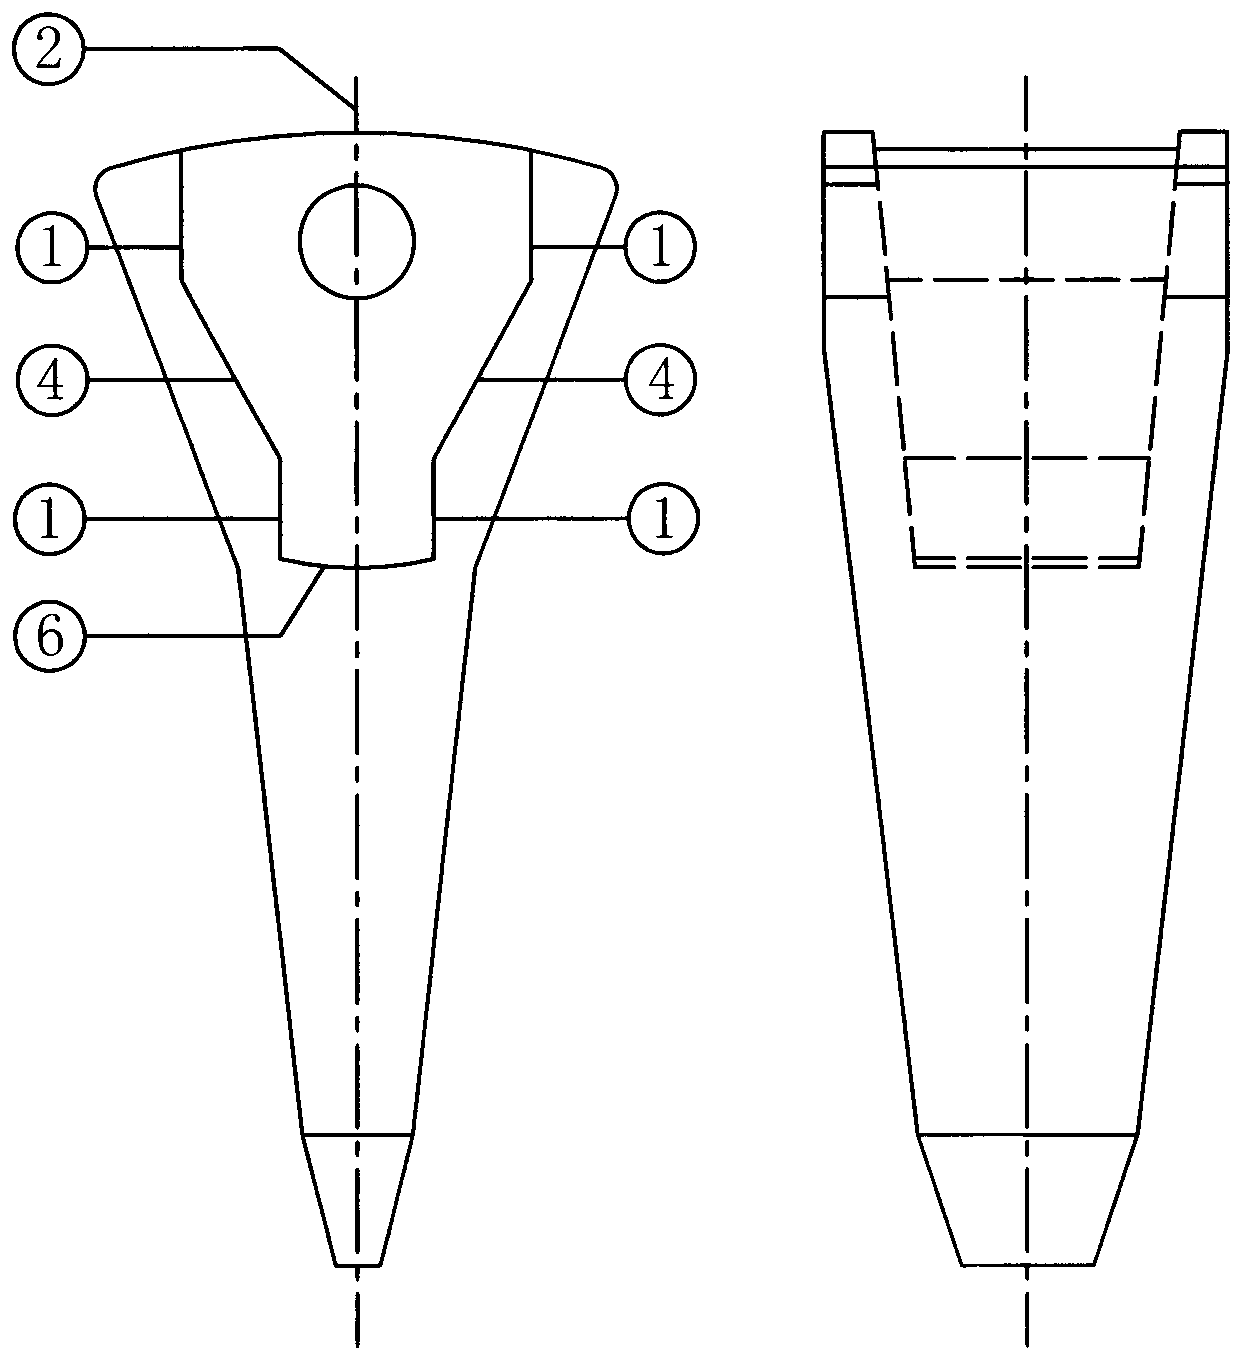 Bucket tooth and tooth base connecting mechanism of engineering machine